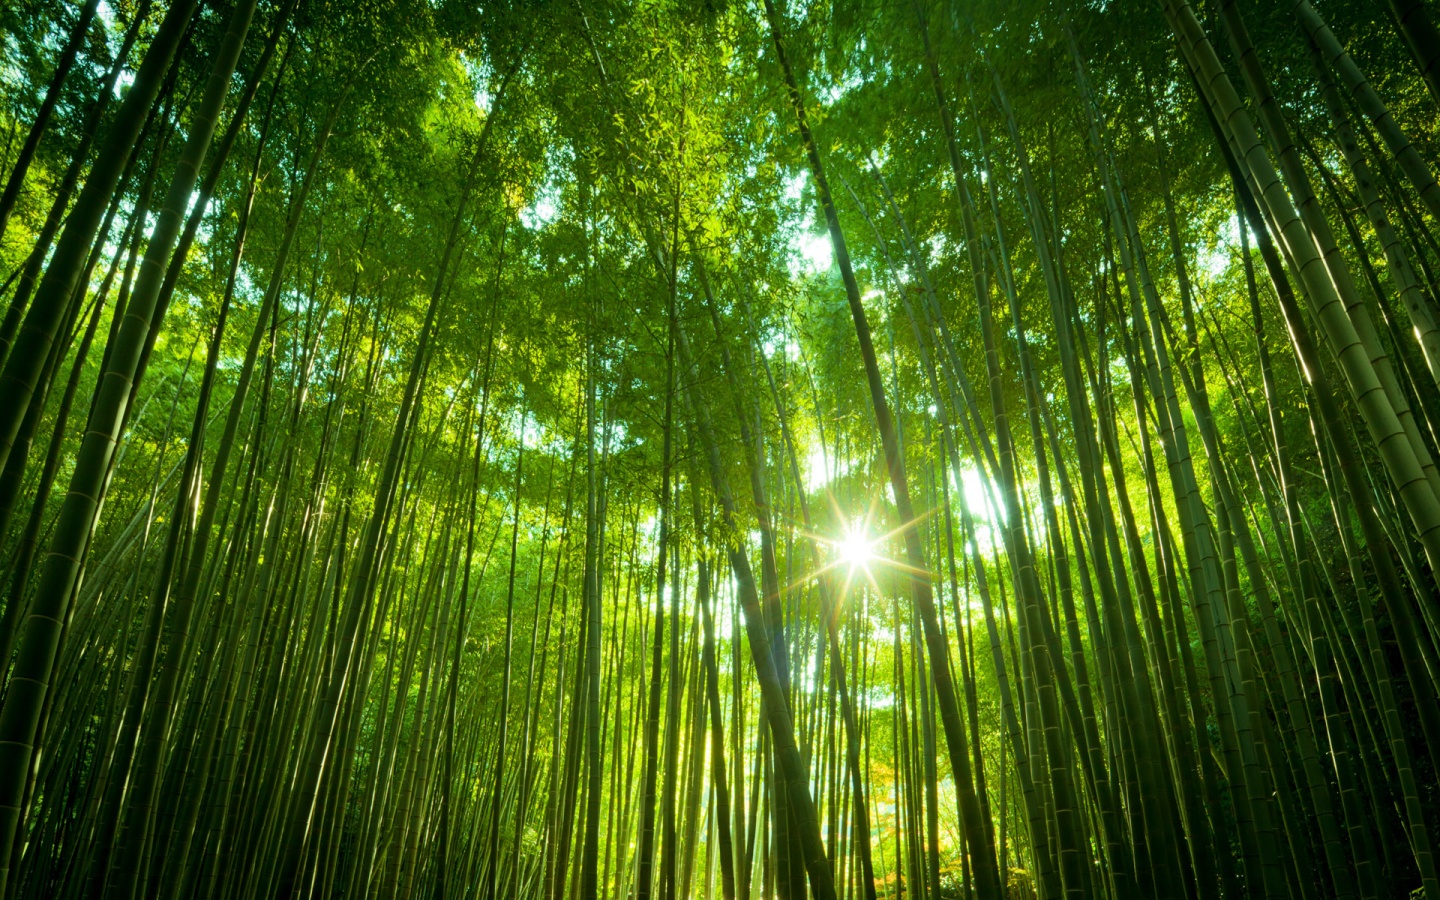 1K Bamboo Forest Pictures  Download Free Images on Unsplash